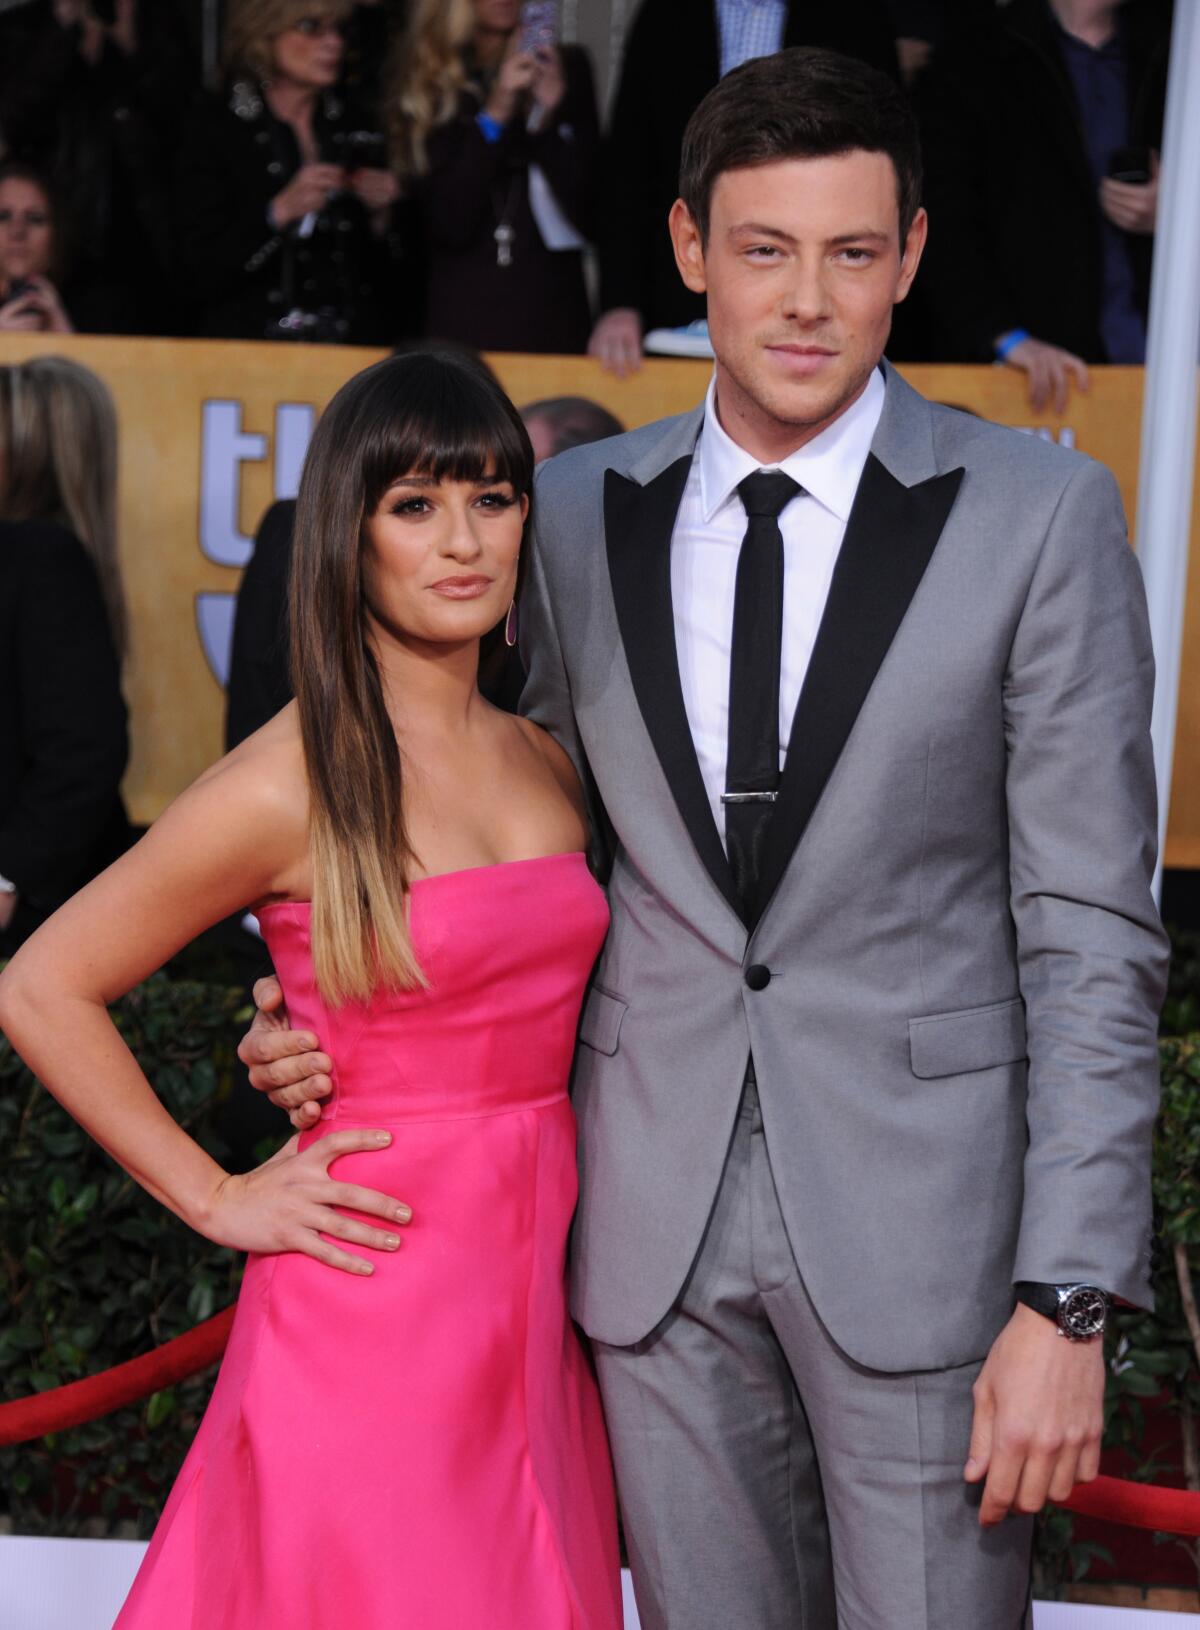 Lea Michele, in a pink strapless dress, stands next to Cory Monteith, who is in a gray suit with black trim